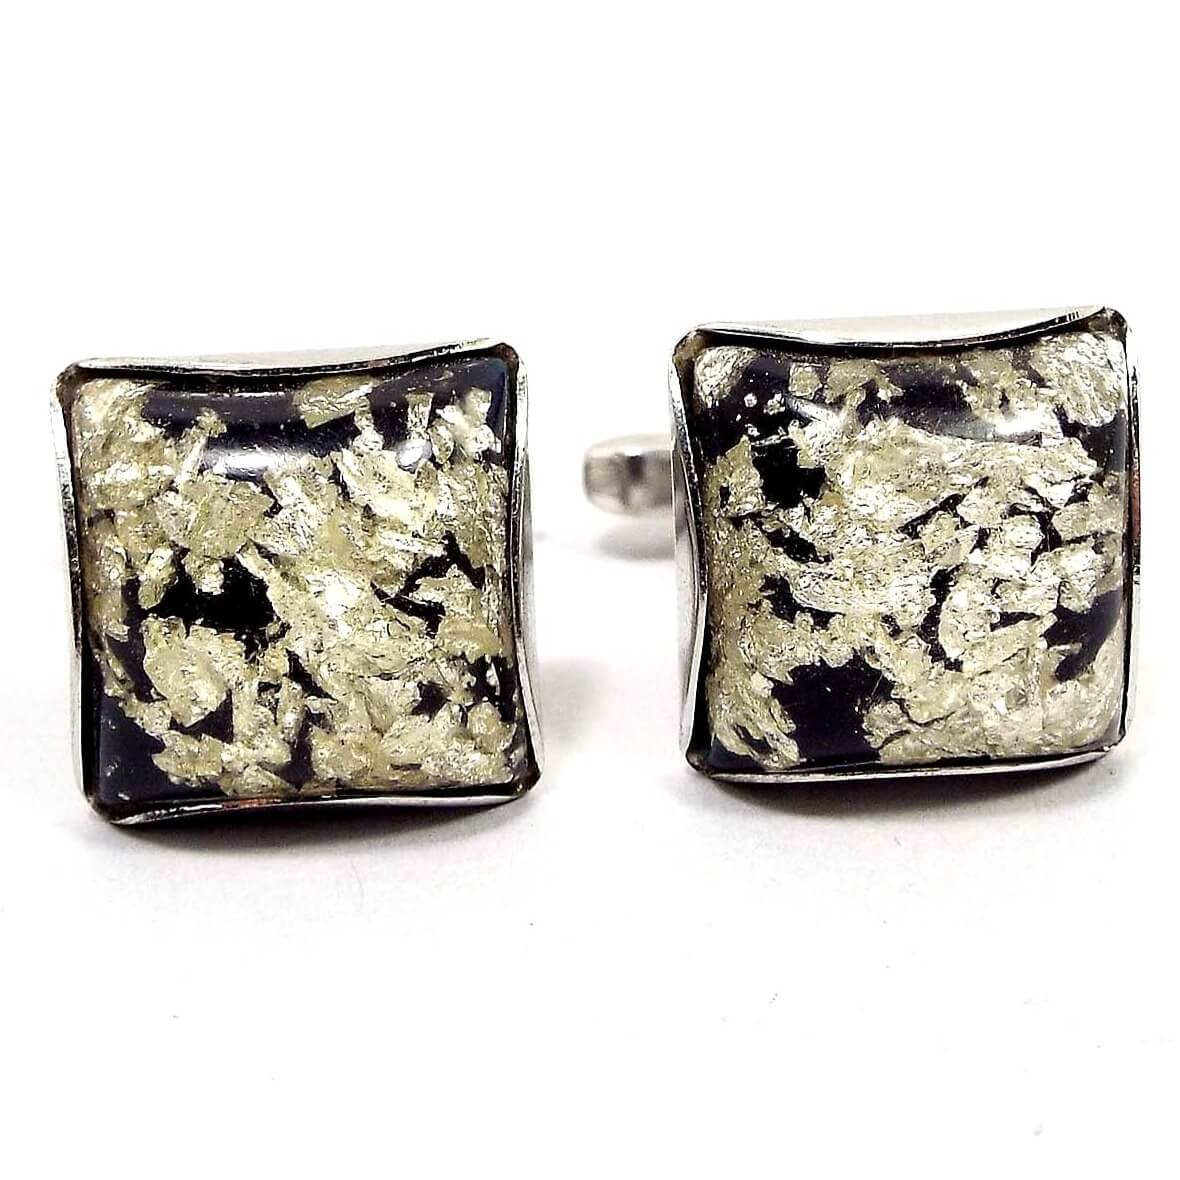 Front view of the Hickok Mid Century vintage confetti lucite cufflinks. They are square with silver tone color metal. The front cabs are black with pieces of metallic silver foil, and is topped with clear lucite that has slightly yellowed from age giving some of the foil pieces a light gold color depending on angle and lighting.